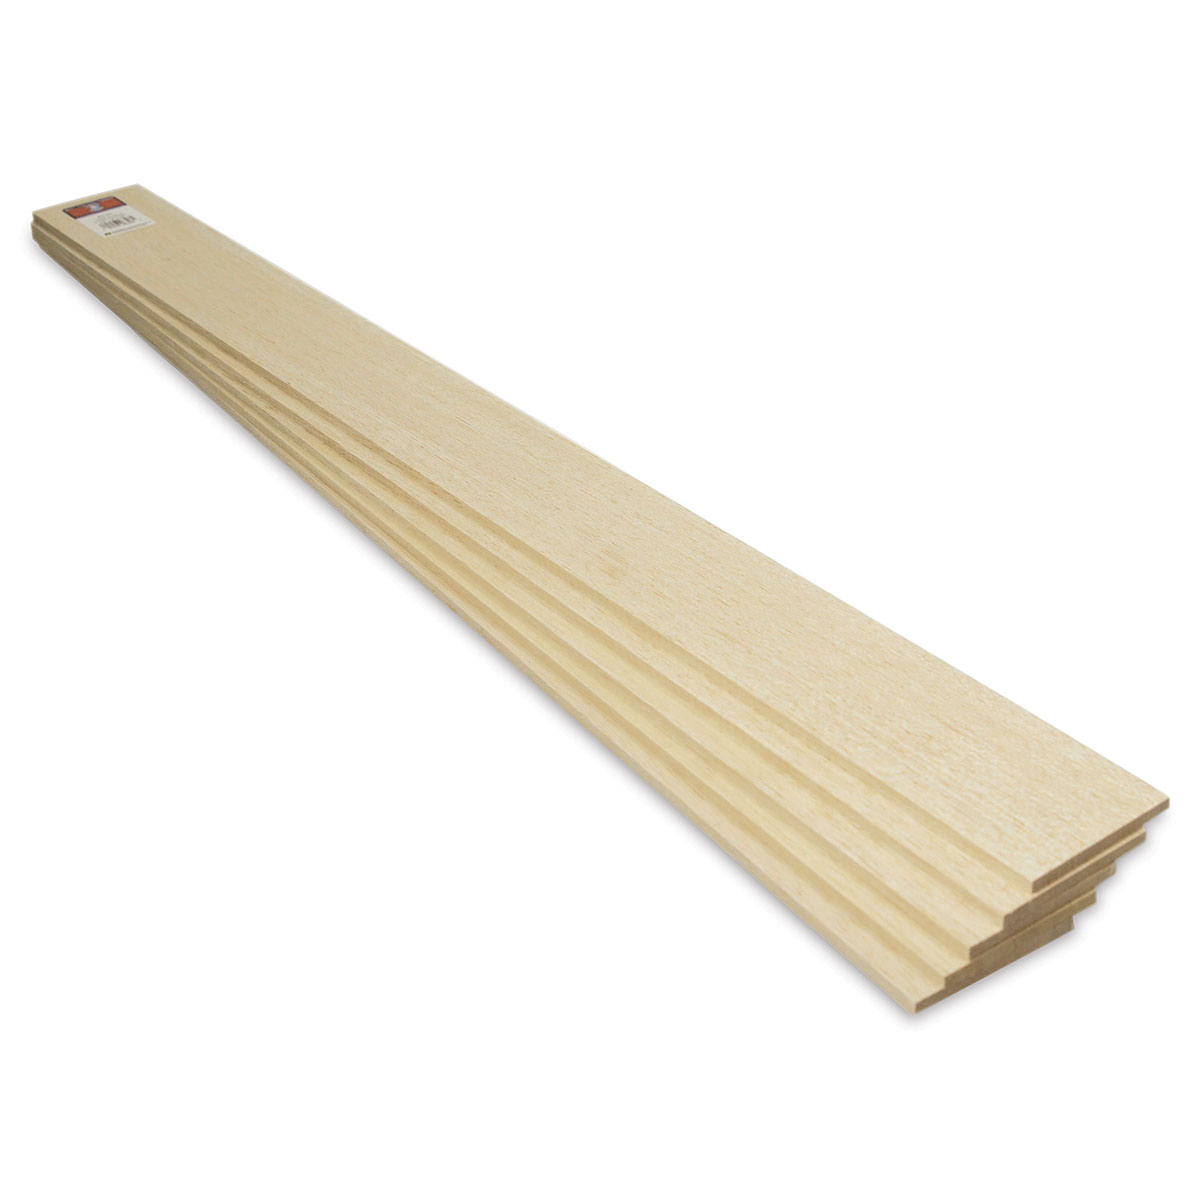 Midwest Balsa Sheets